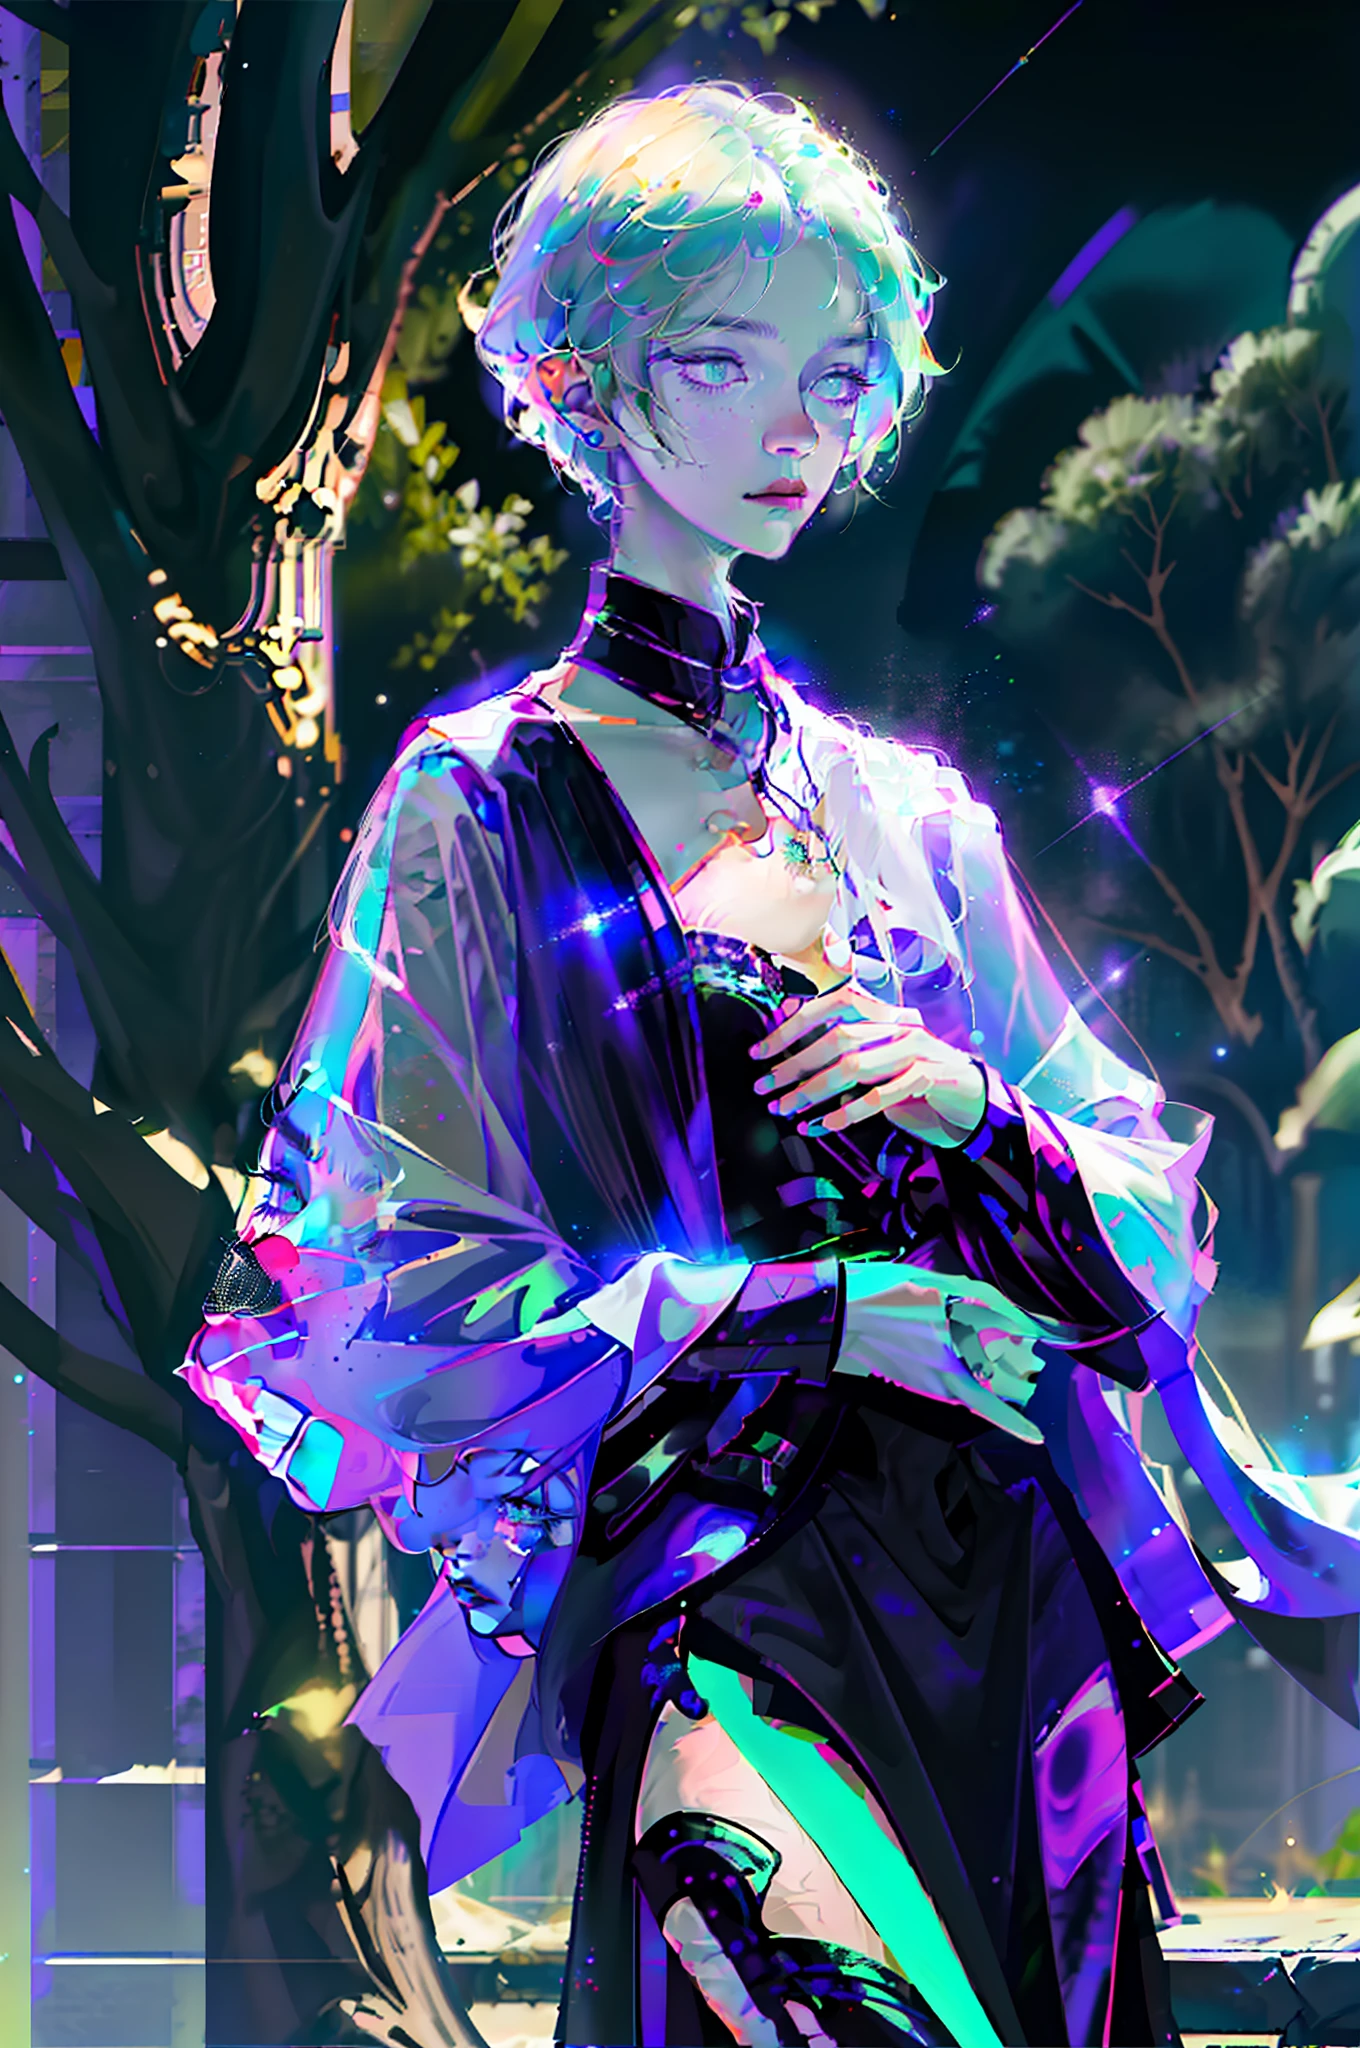 Masterpiece, high resolution, high quality details, intrincated details, 8k, A male elf, magic particles, night landscape, wearing black shiny clothe, purple hair, green eyes, milky skin, innocent expression,